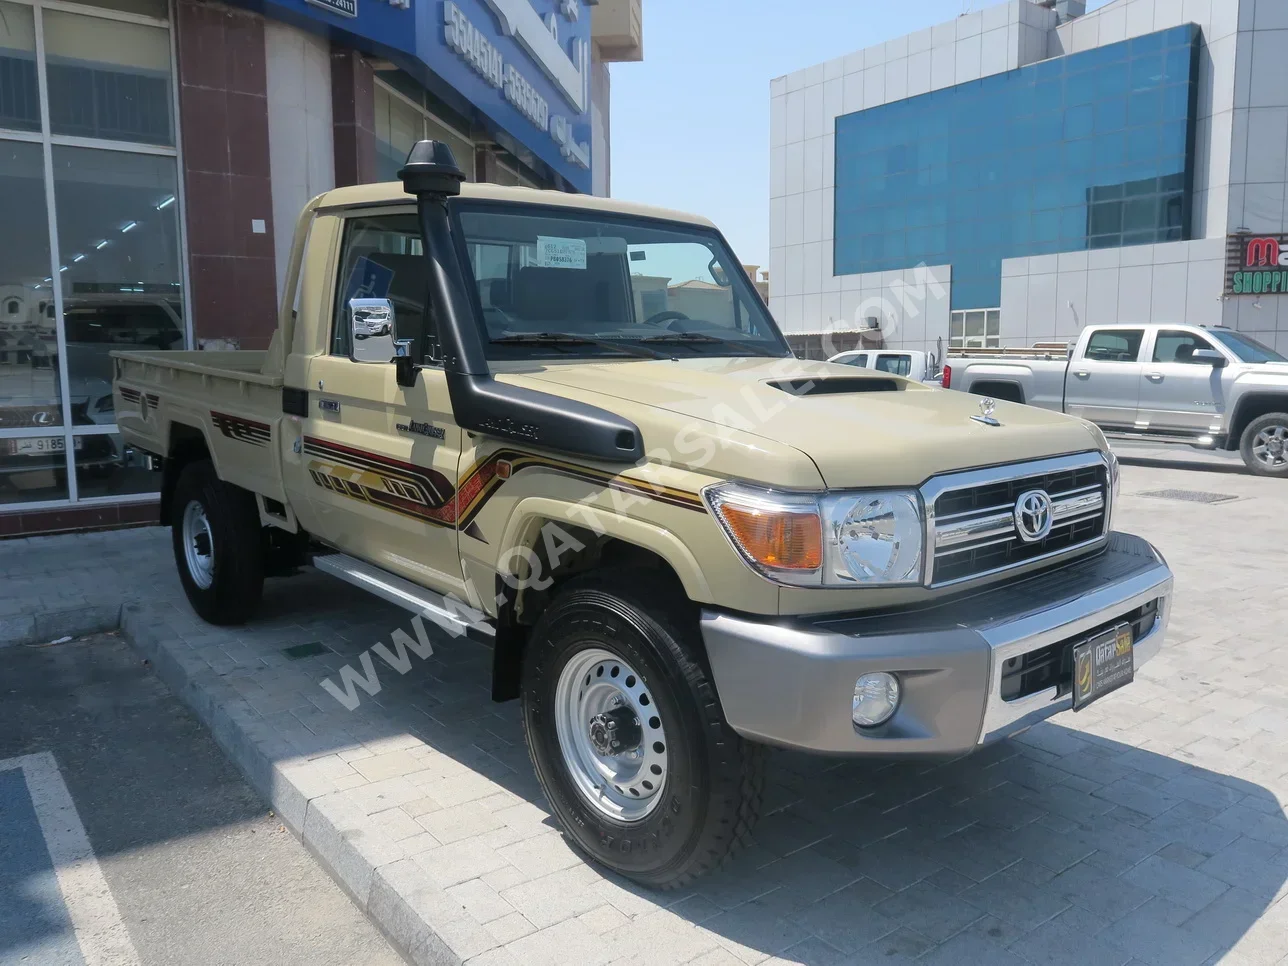 Toyota  Land Cruiser  LX  2023  Manual  0 Km  8 Cylinder  Four Wheel Drive (4WD)  Pick Up  Beige  With Warranty